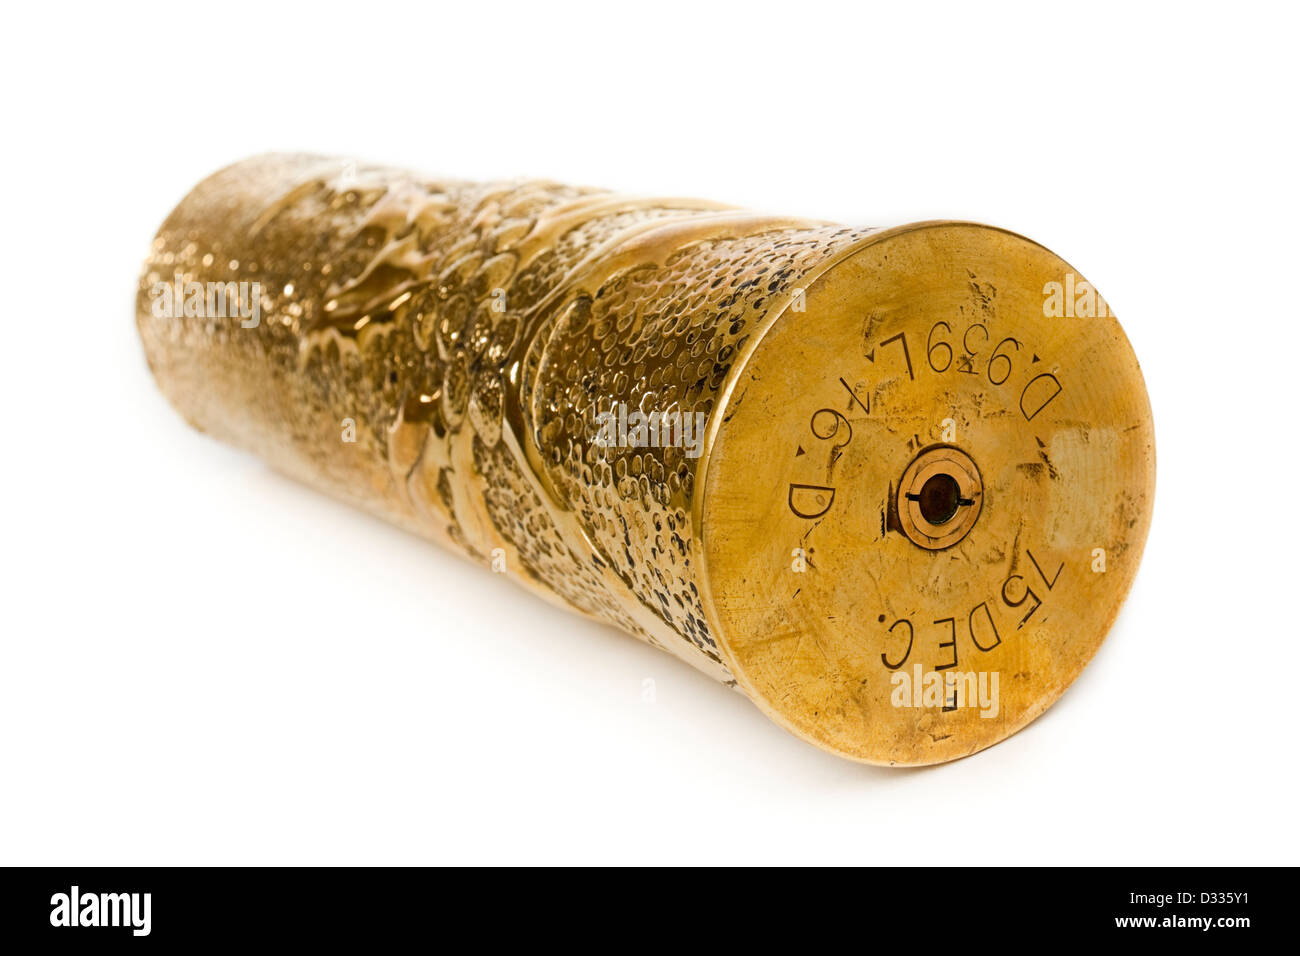 https://c8.alamy.com/comp/D335Y1/antique-1916-french-75mm-deeply-hand-embossed-brass-gun-shell-case-D335Y1.jpg